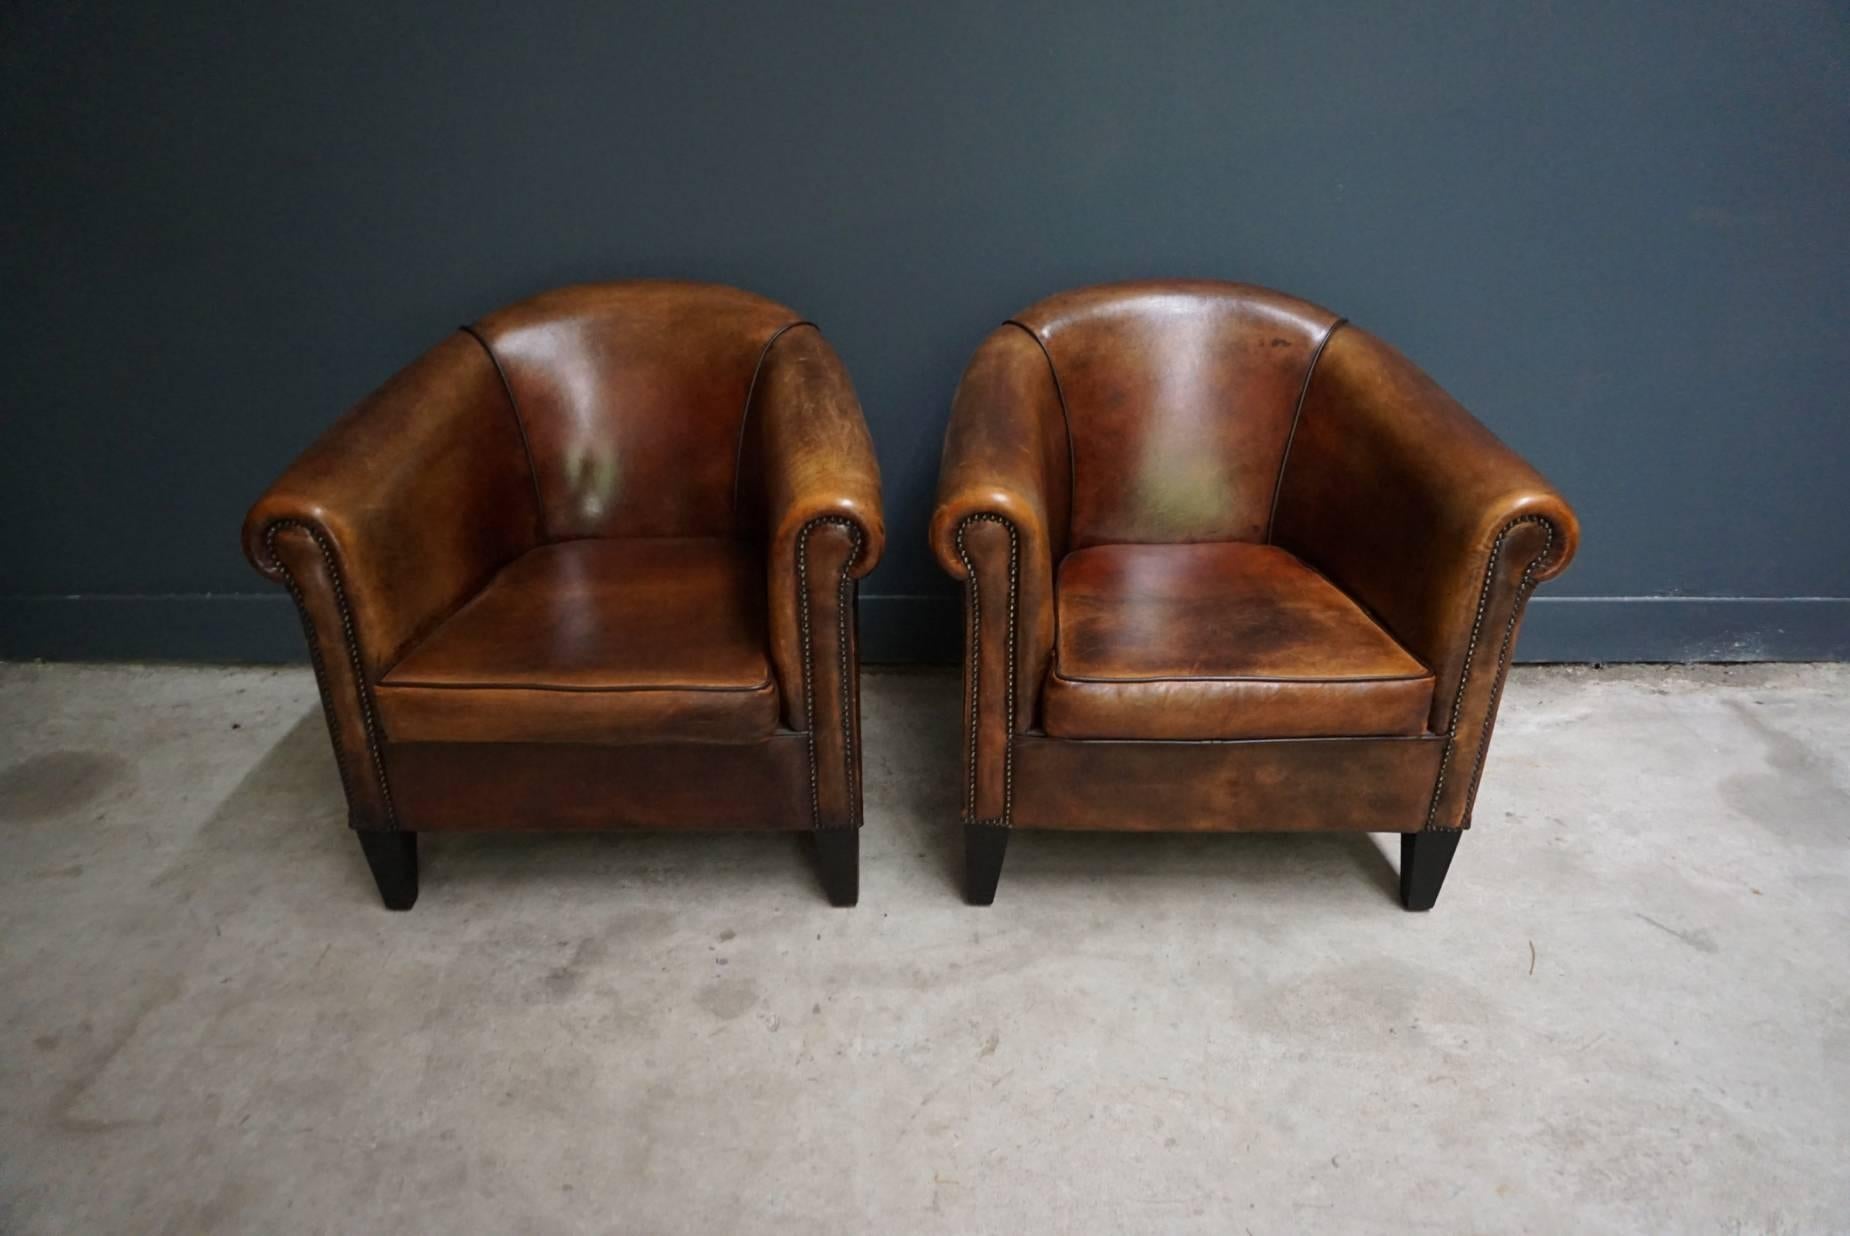 Industrial Vintage Dutch Cognac Leather Club Chairs, Set of Two